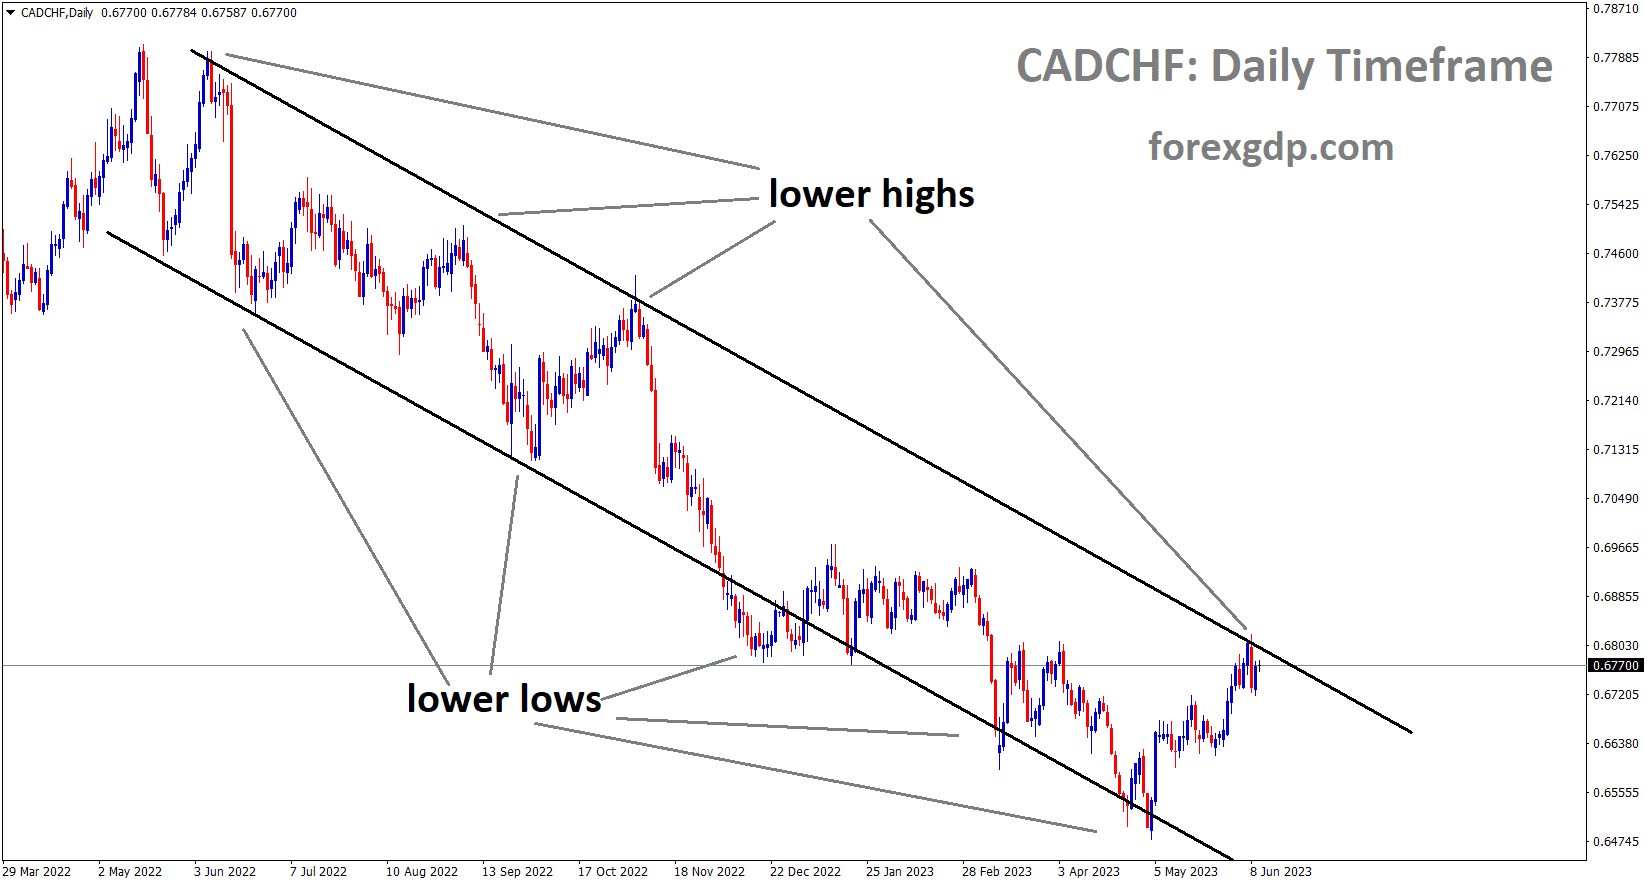 CADCHF is moving in the Descending channel and the market has reached the lower high area of the channel